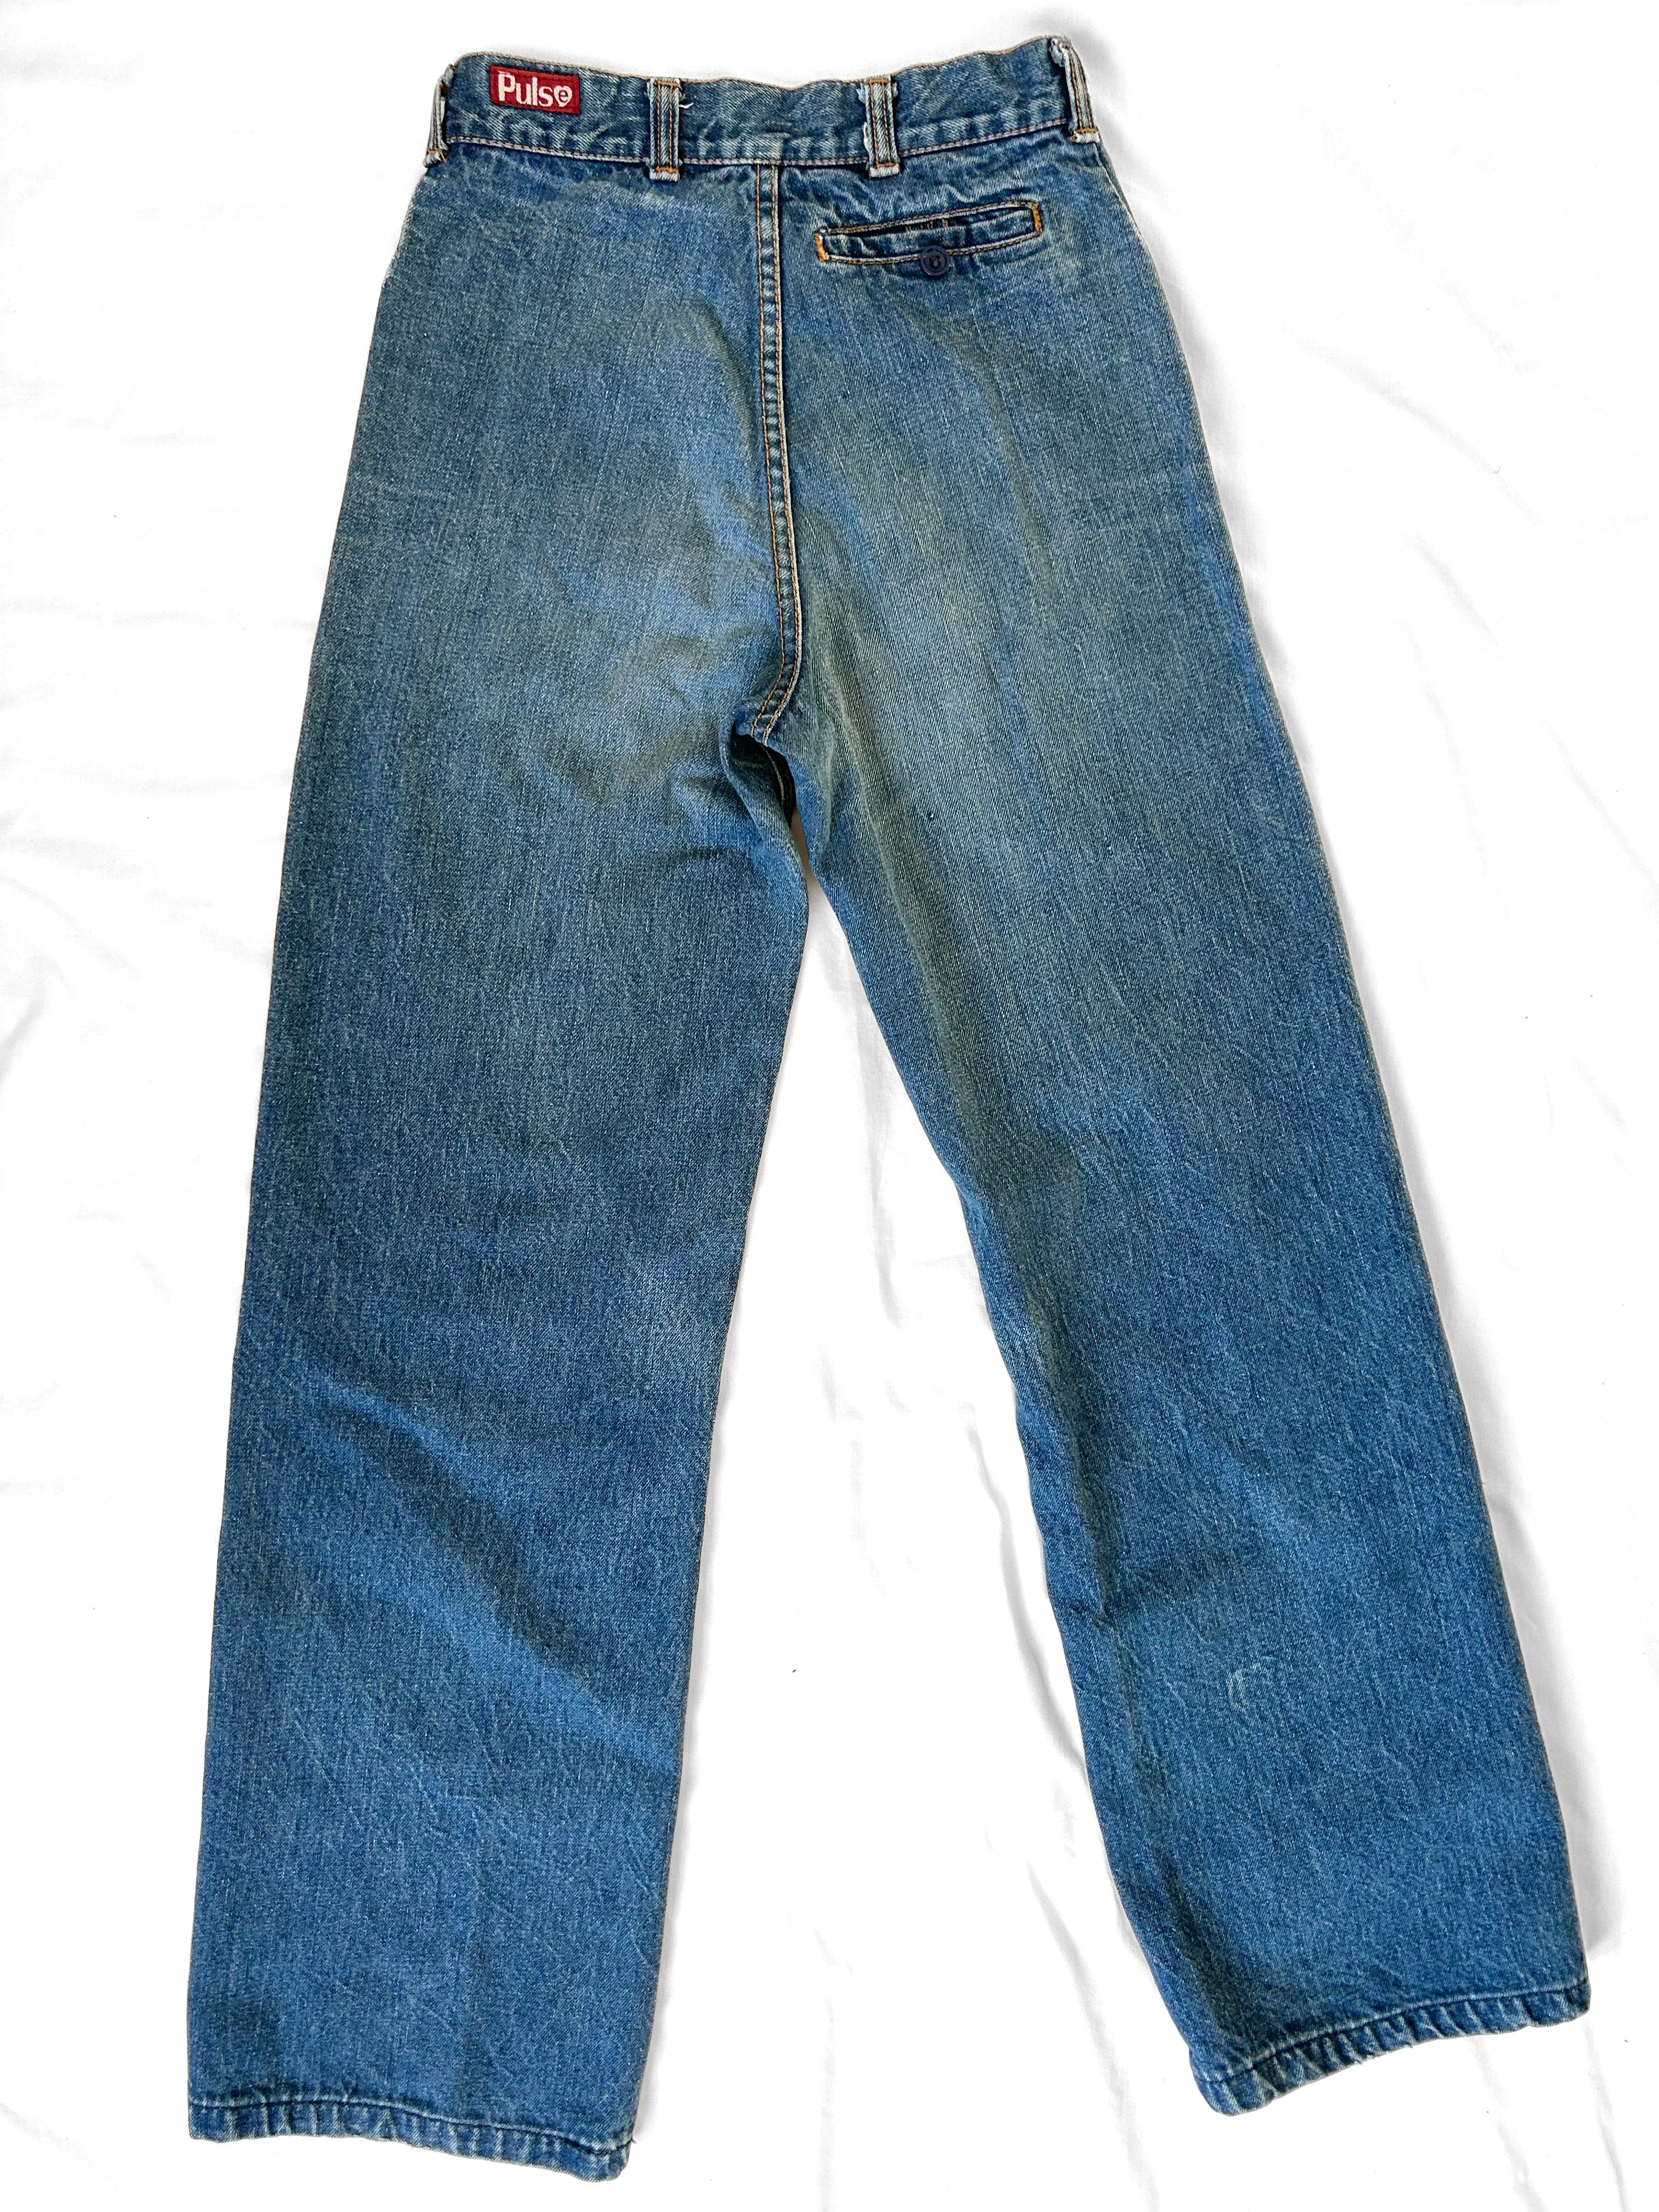 70s Vintage Distressed Jeans, High Rise 26” Waist, Wide Straight Leg, Made in Canada